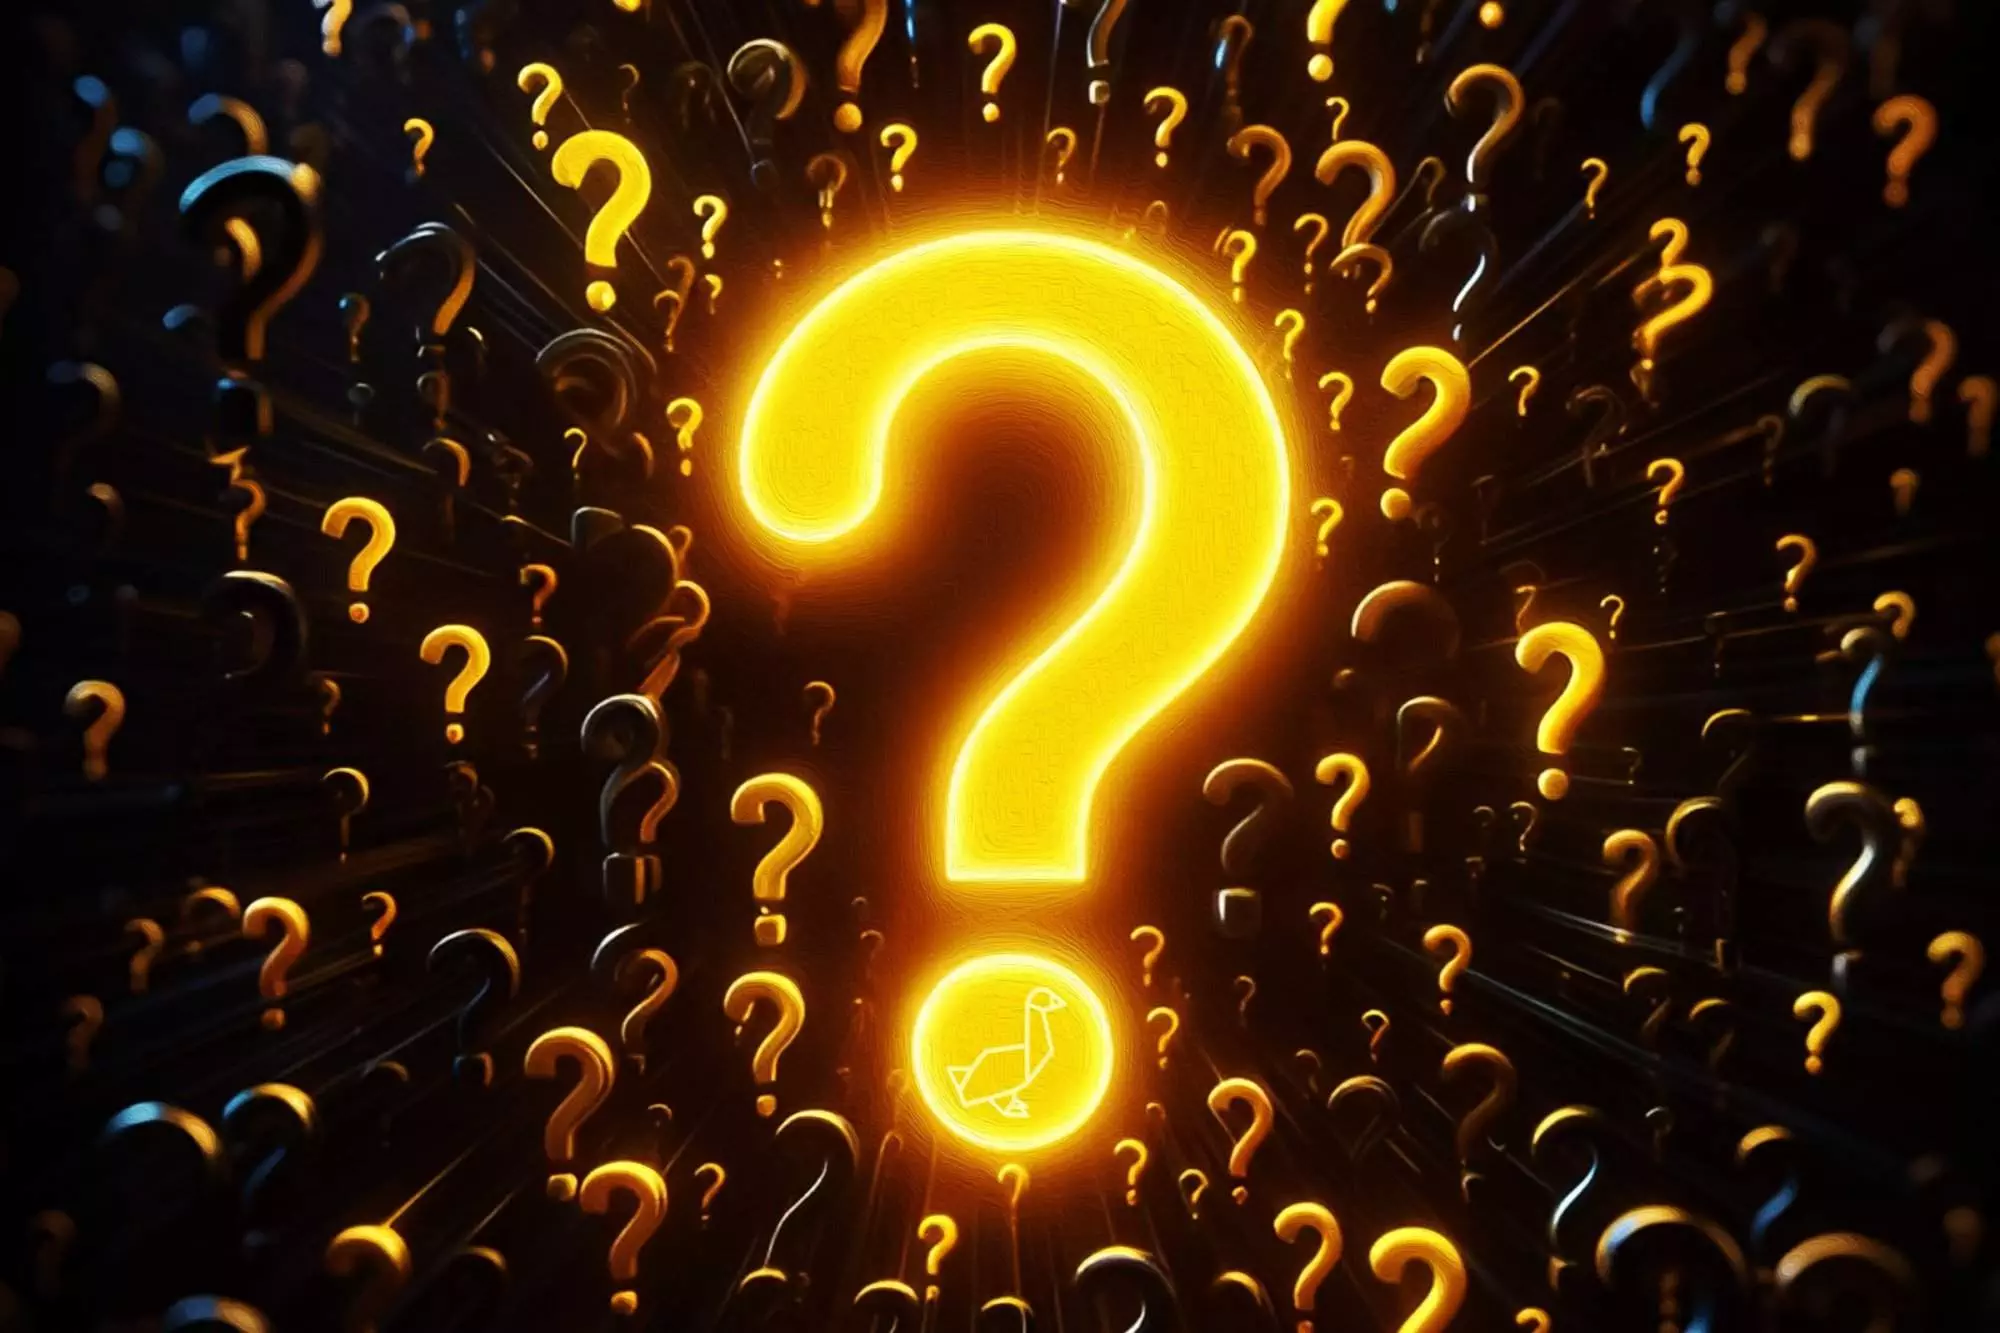 Glowing golden question mark in a dark background surrounded by smaller question marks.